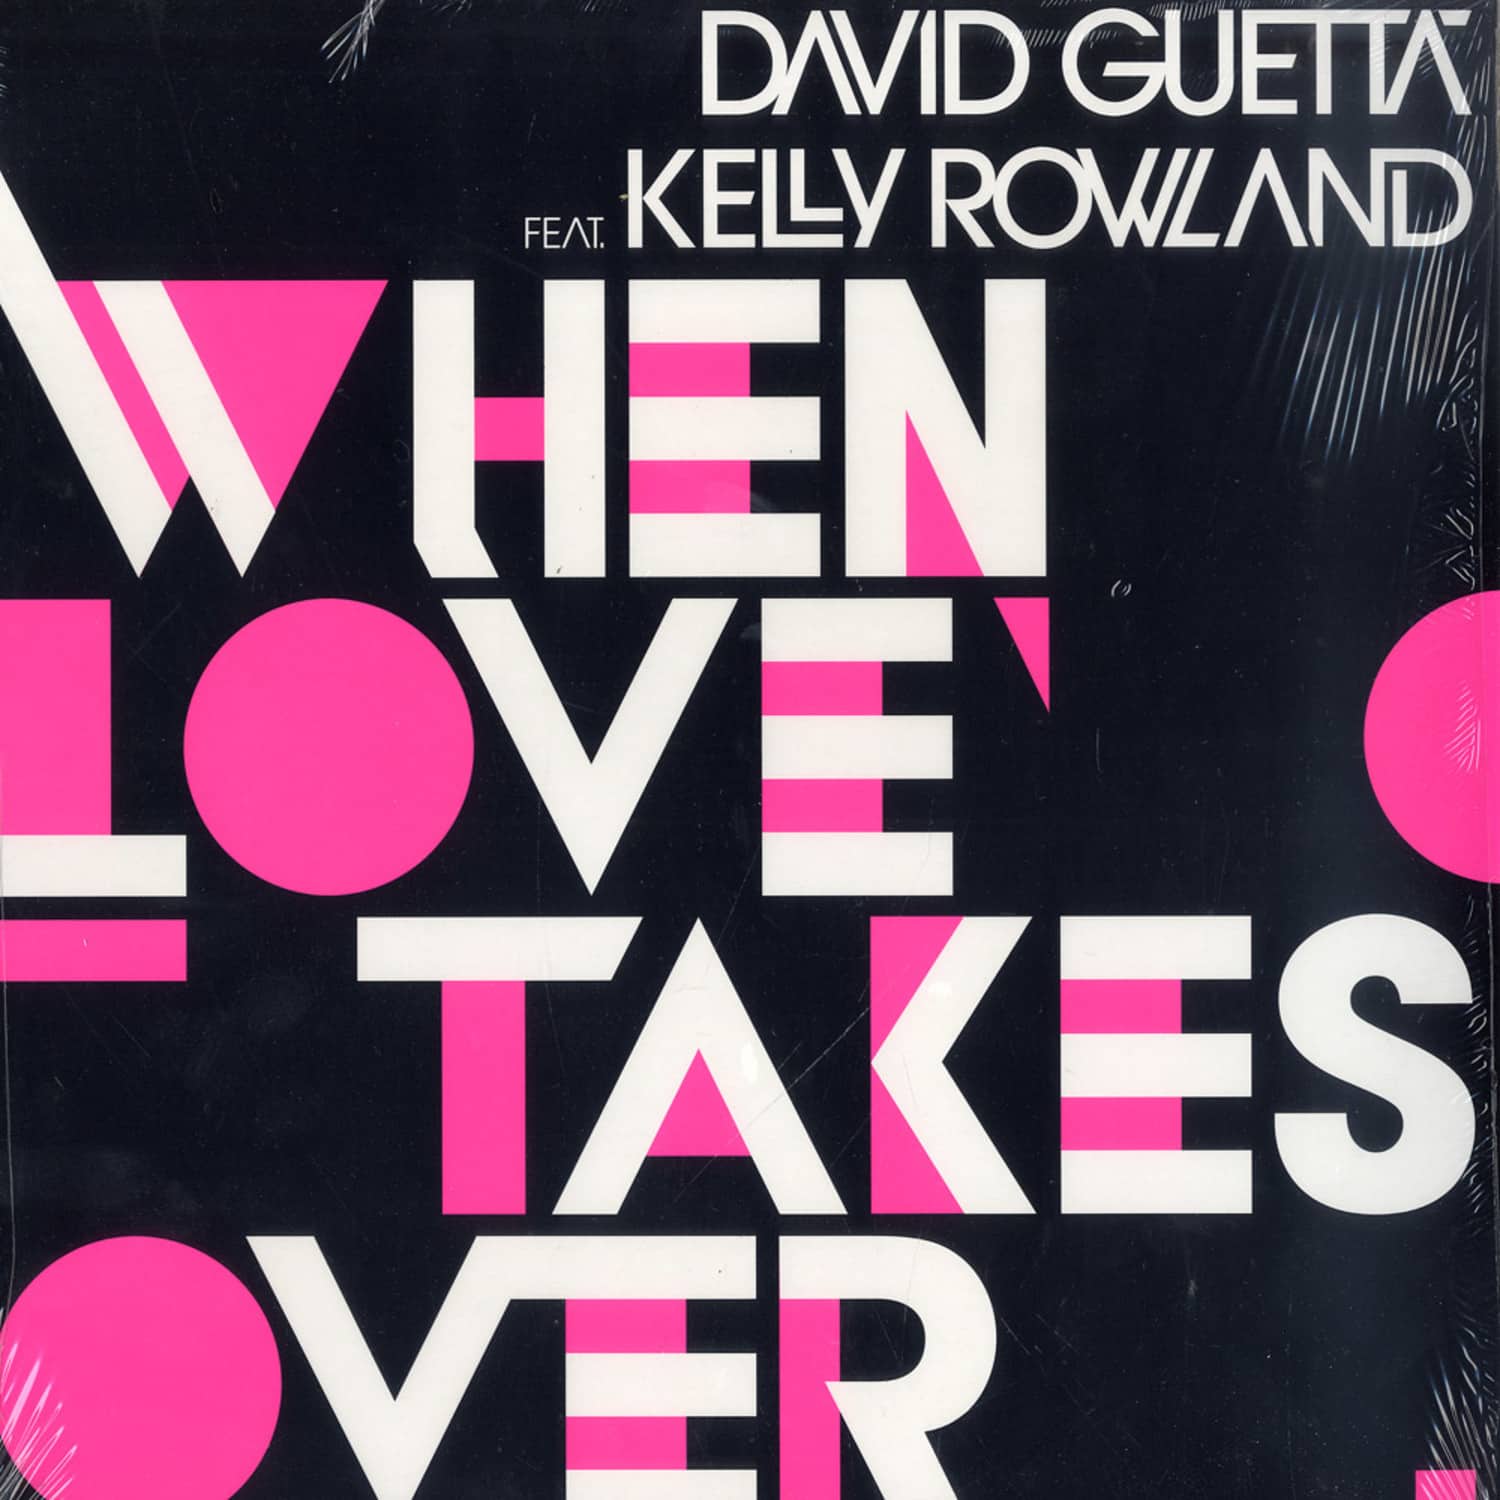 David Guetta feat Kelly Rowland - WHEN LOVE TAKES OVER